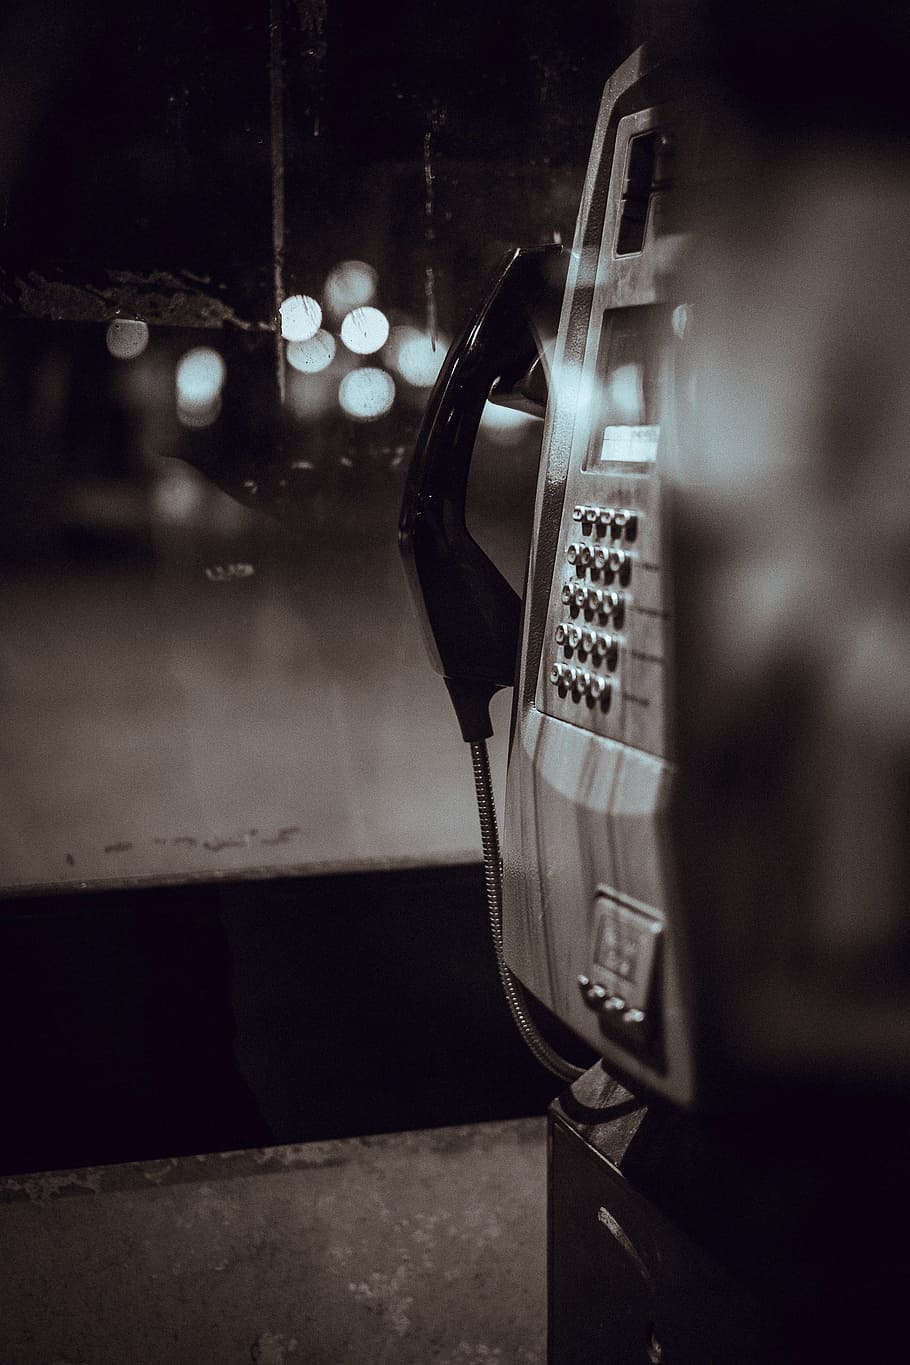 payphone, communication, call, telephone, black and white, close-up, technology, night, retro styled, still life